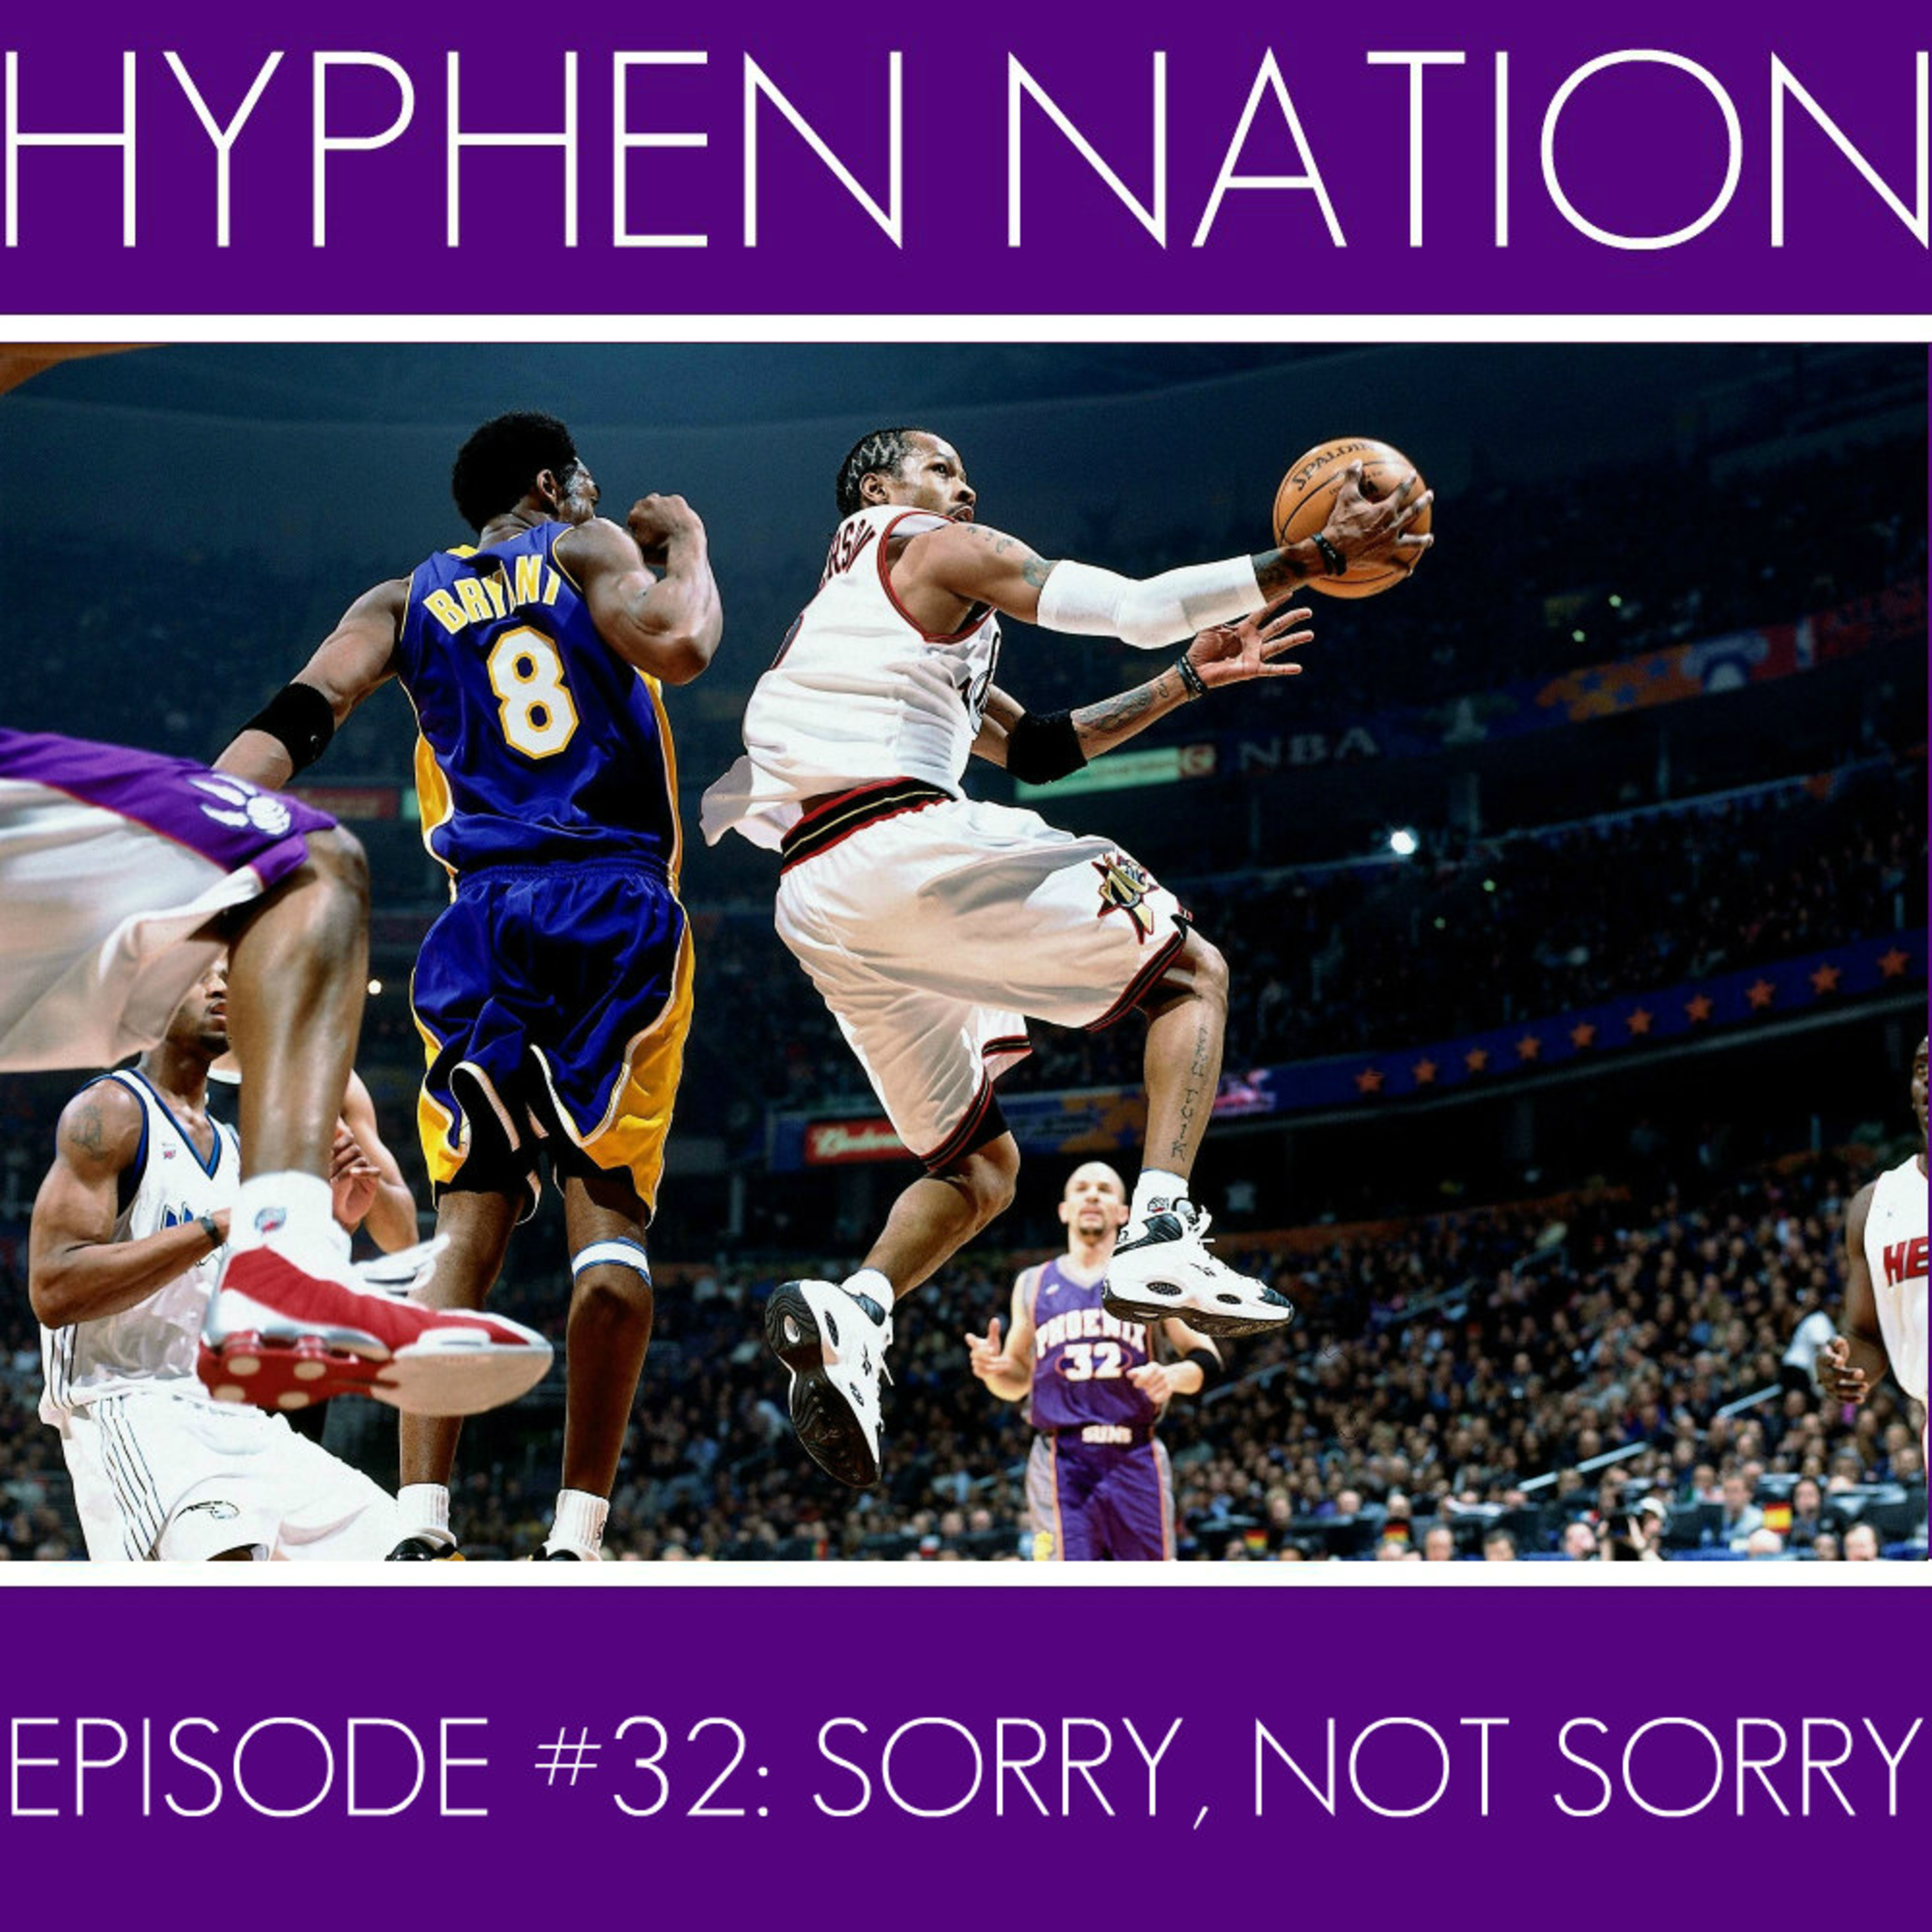 Episode #32: Sorry, Not Sorry